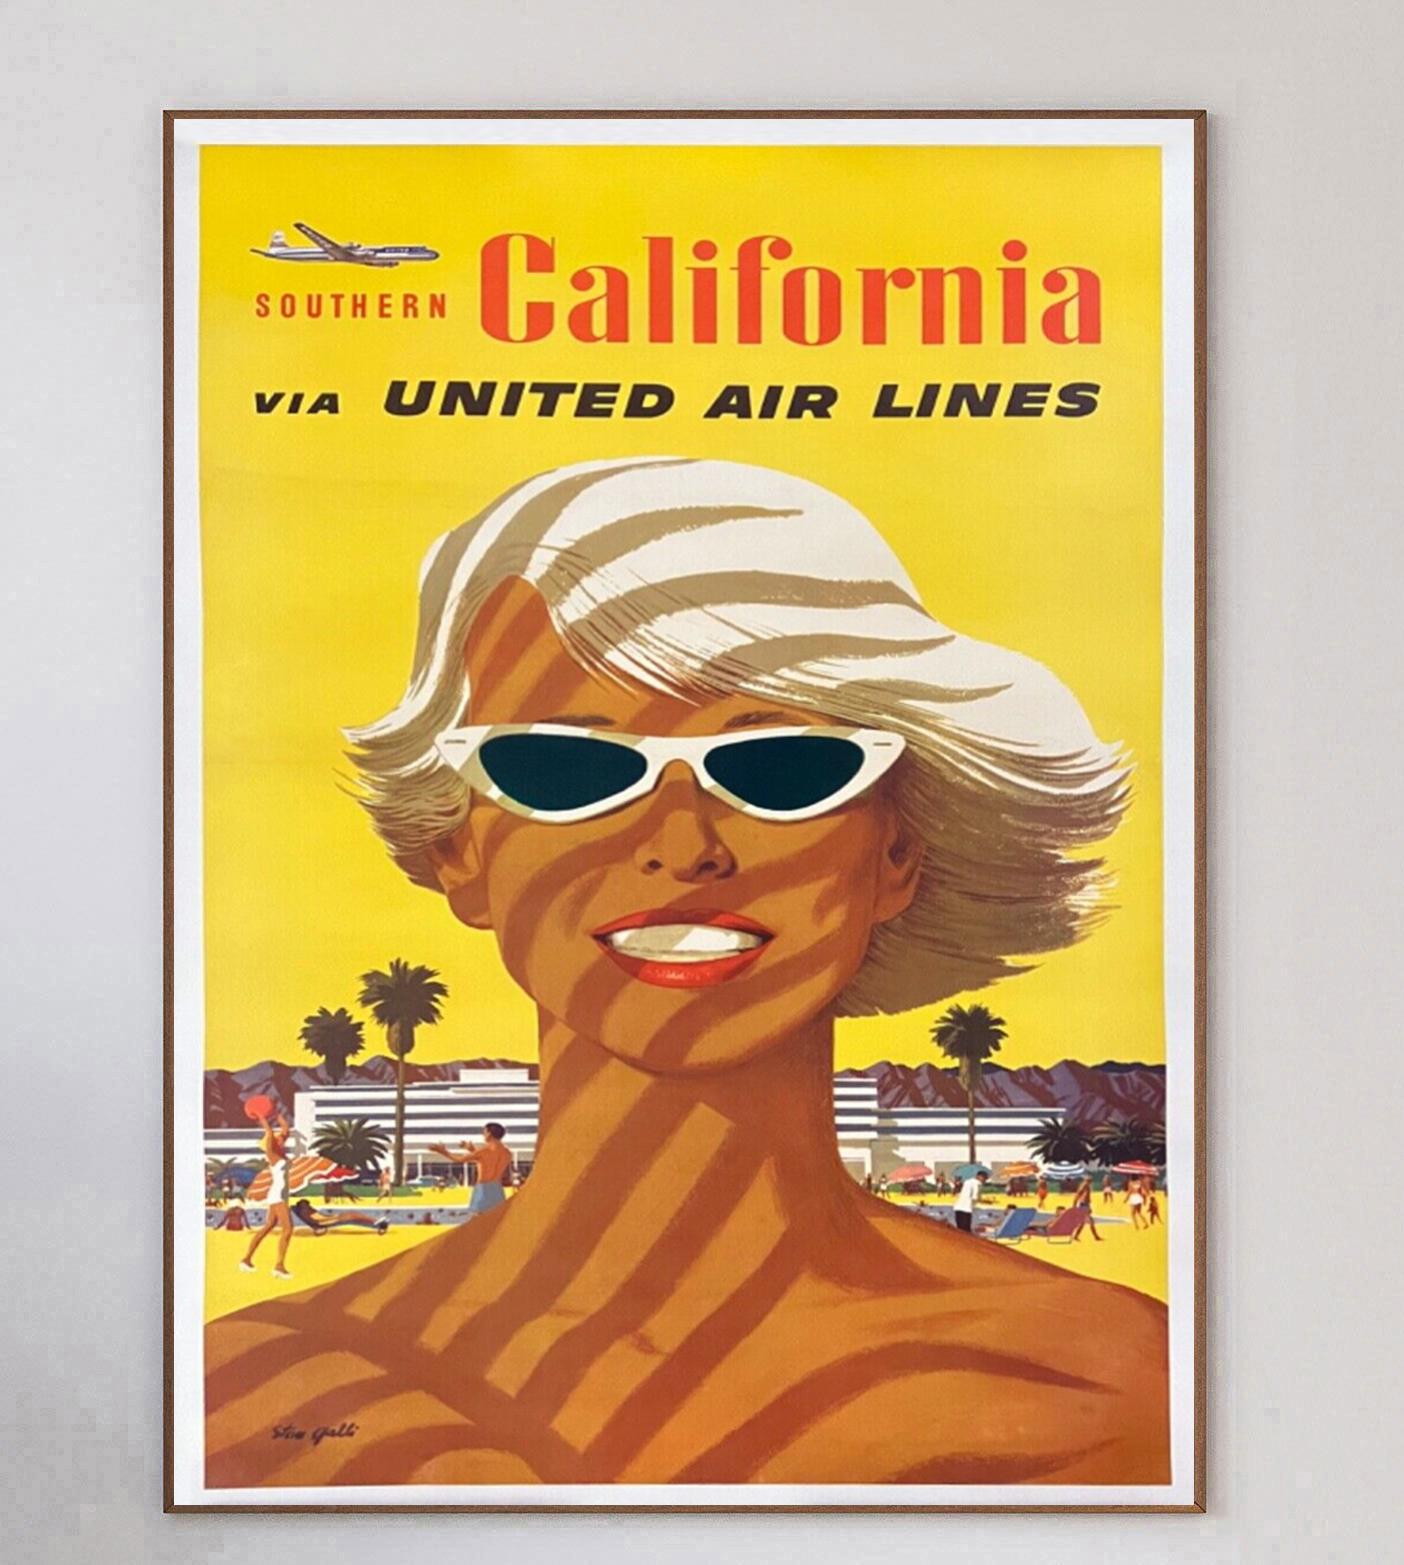 With artwork from the great poster designer and illustrator Stan Galli, this stunning and rare poster from 1950 promotes United Airlines routes to Southern California. Depicting a woman enjoying the sun and the breeze at the beach. 

The third